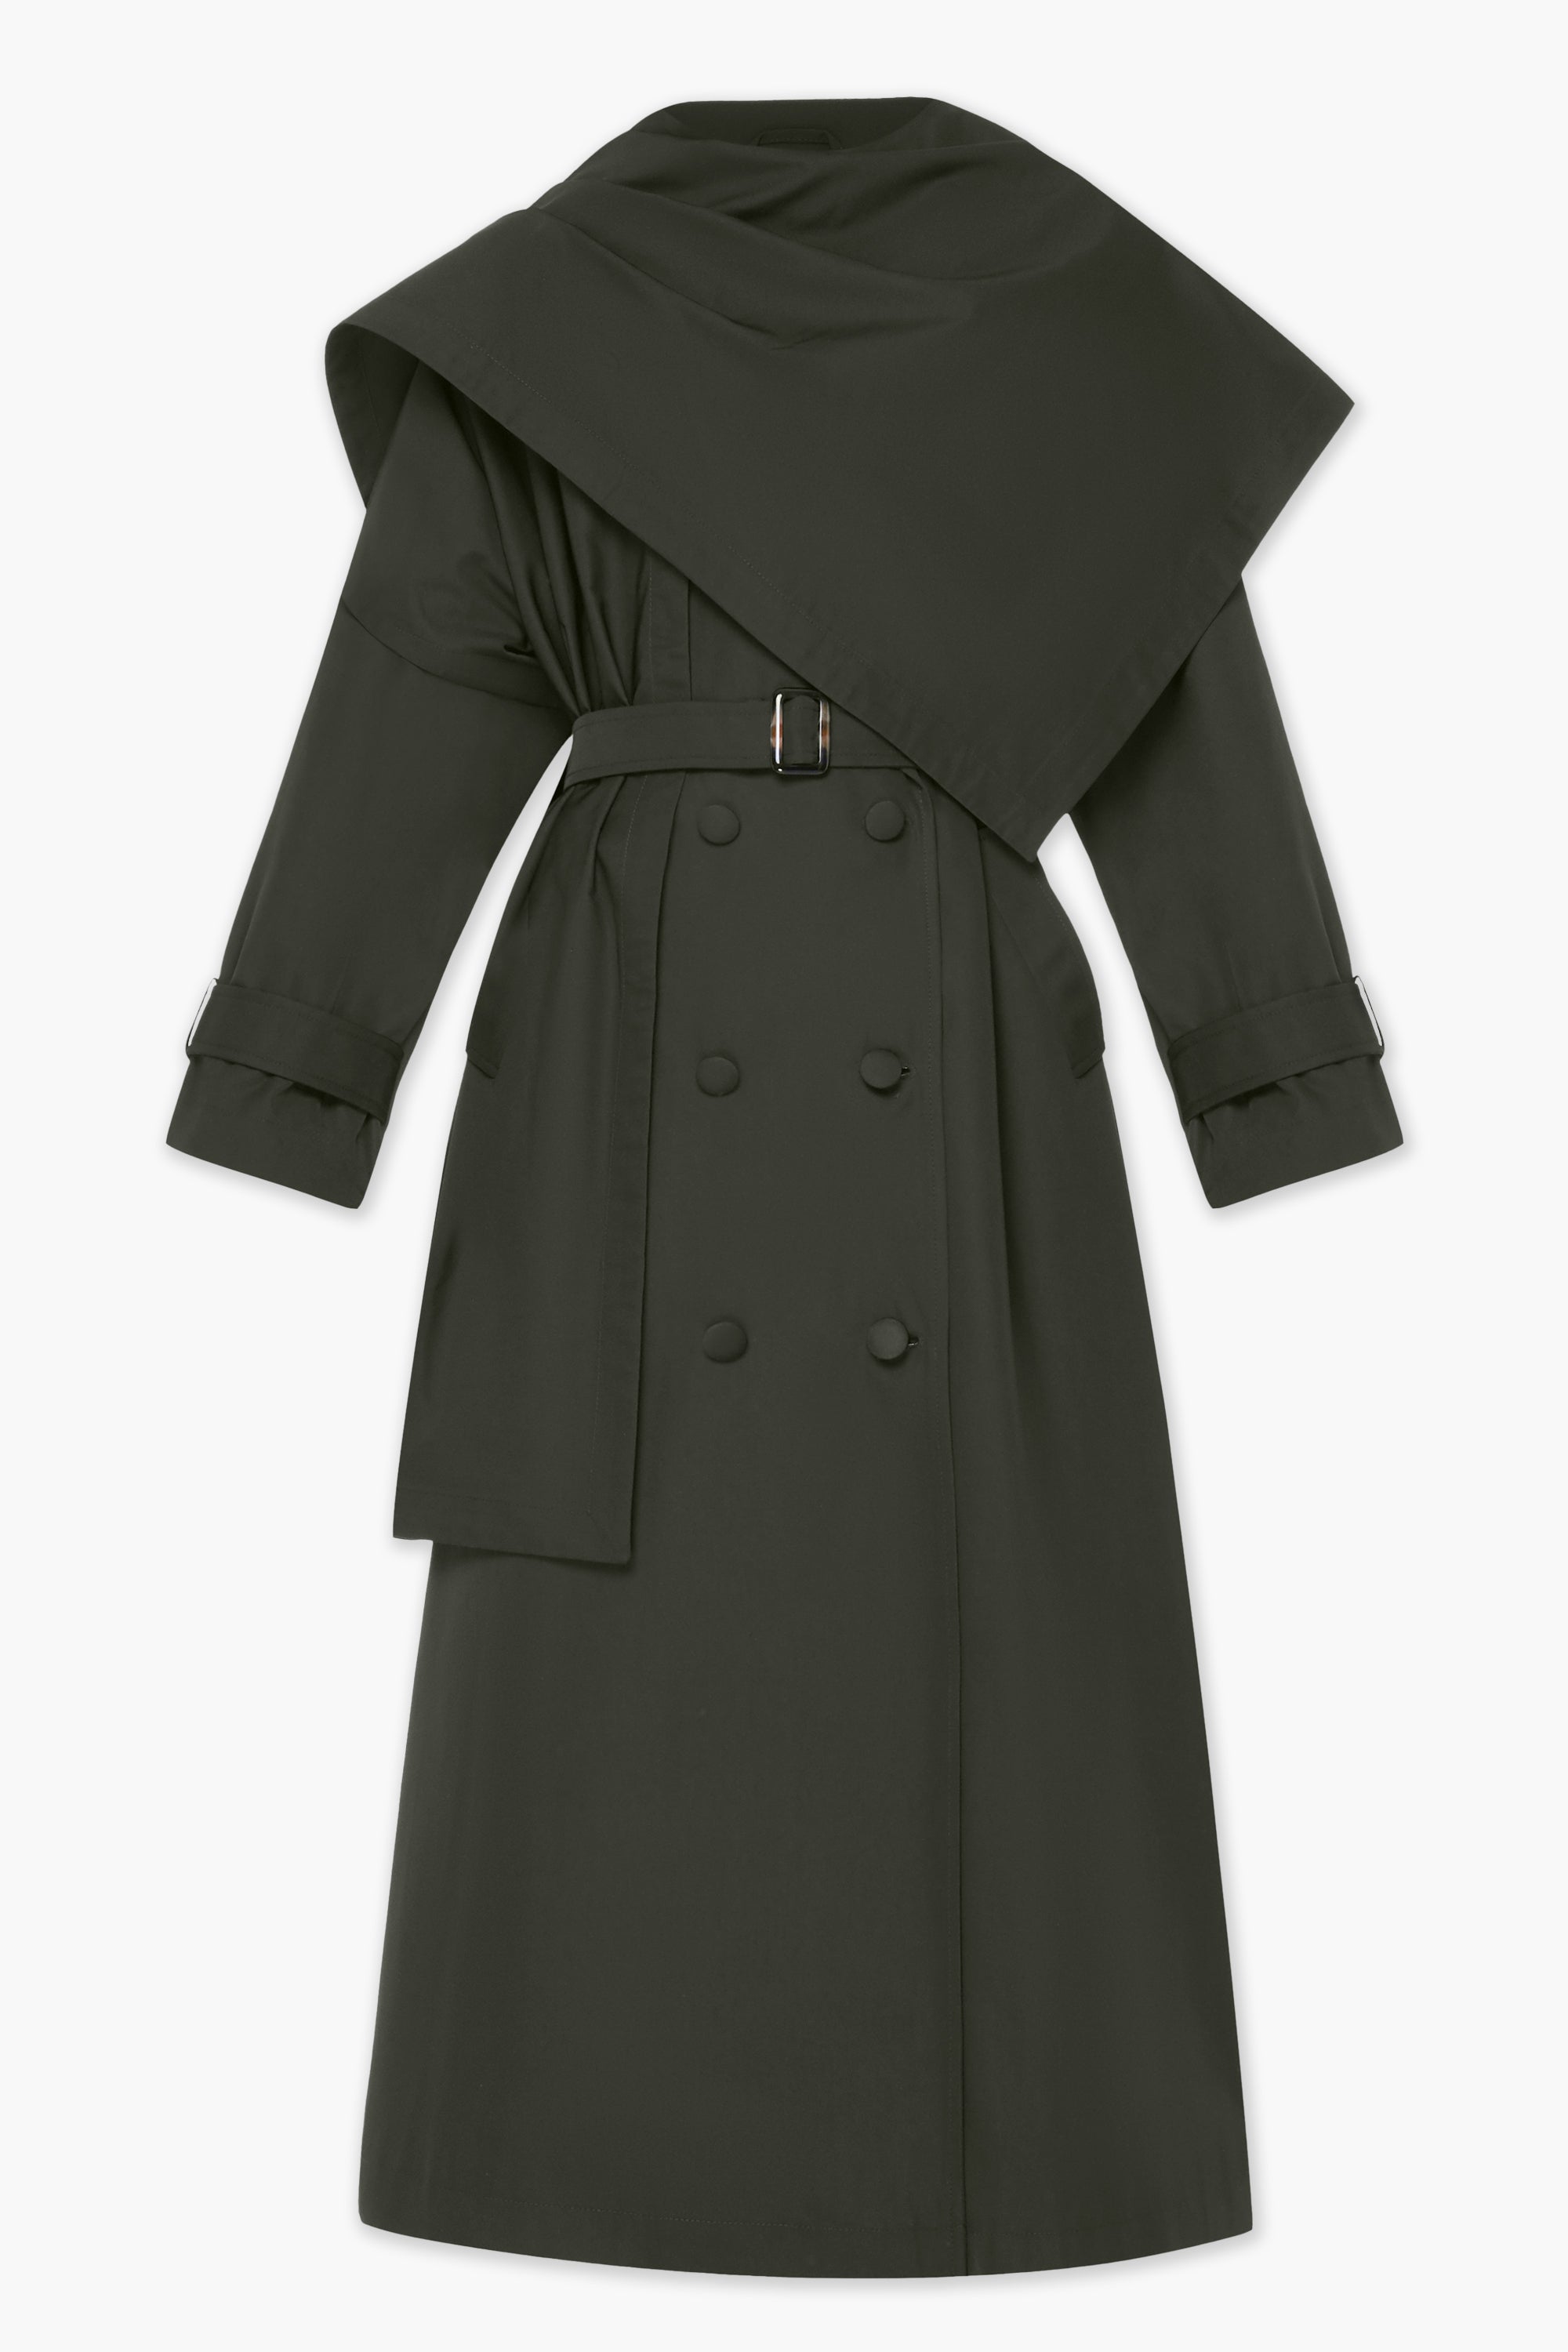 AMSTERDAM trench coat / forest green